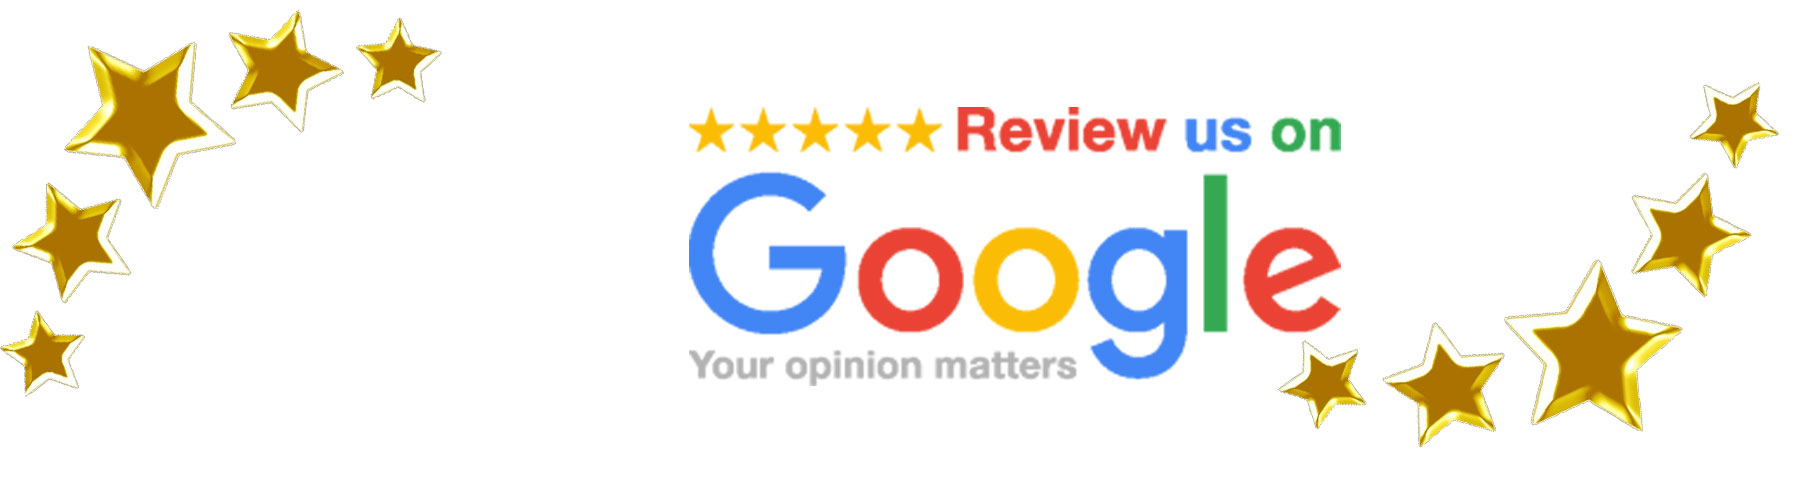 Review our Service on google my business